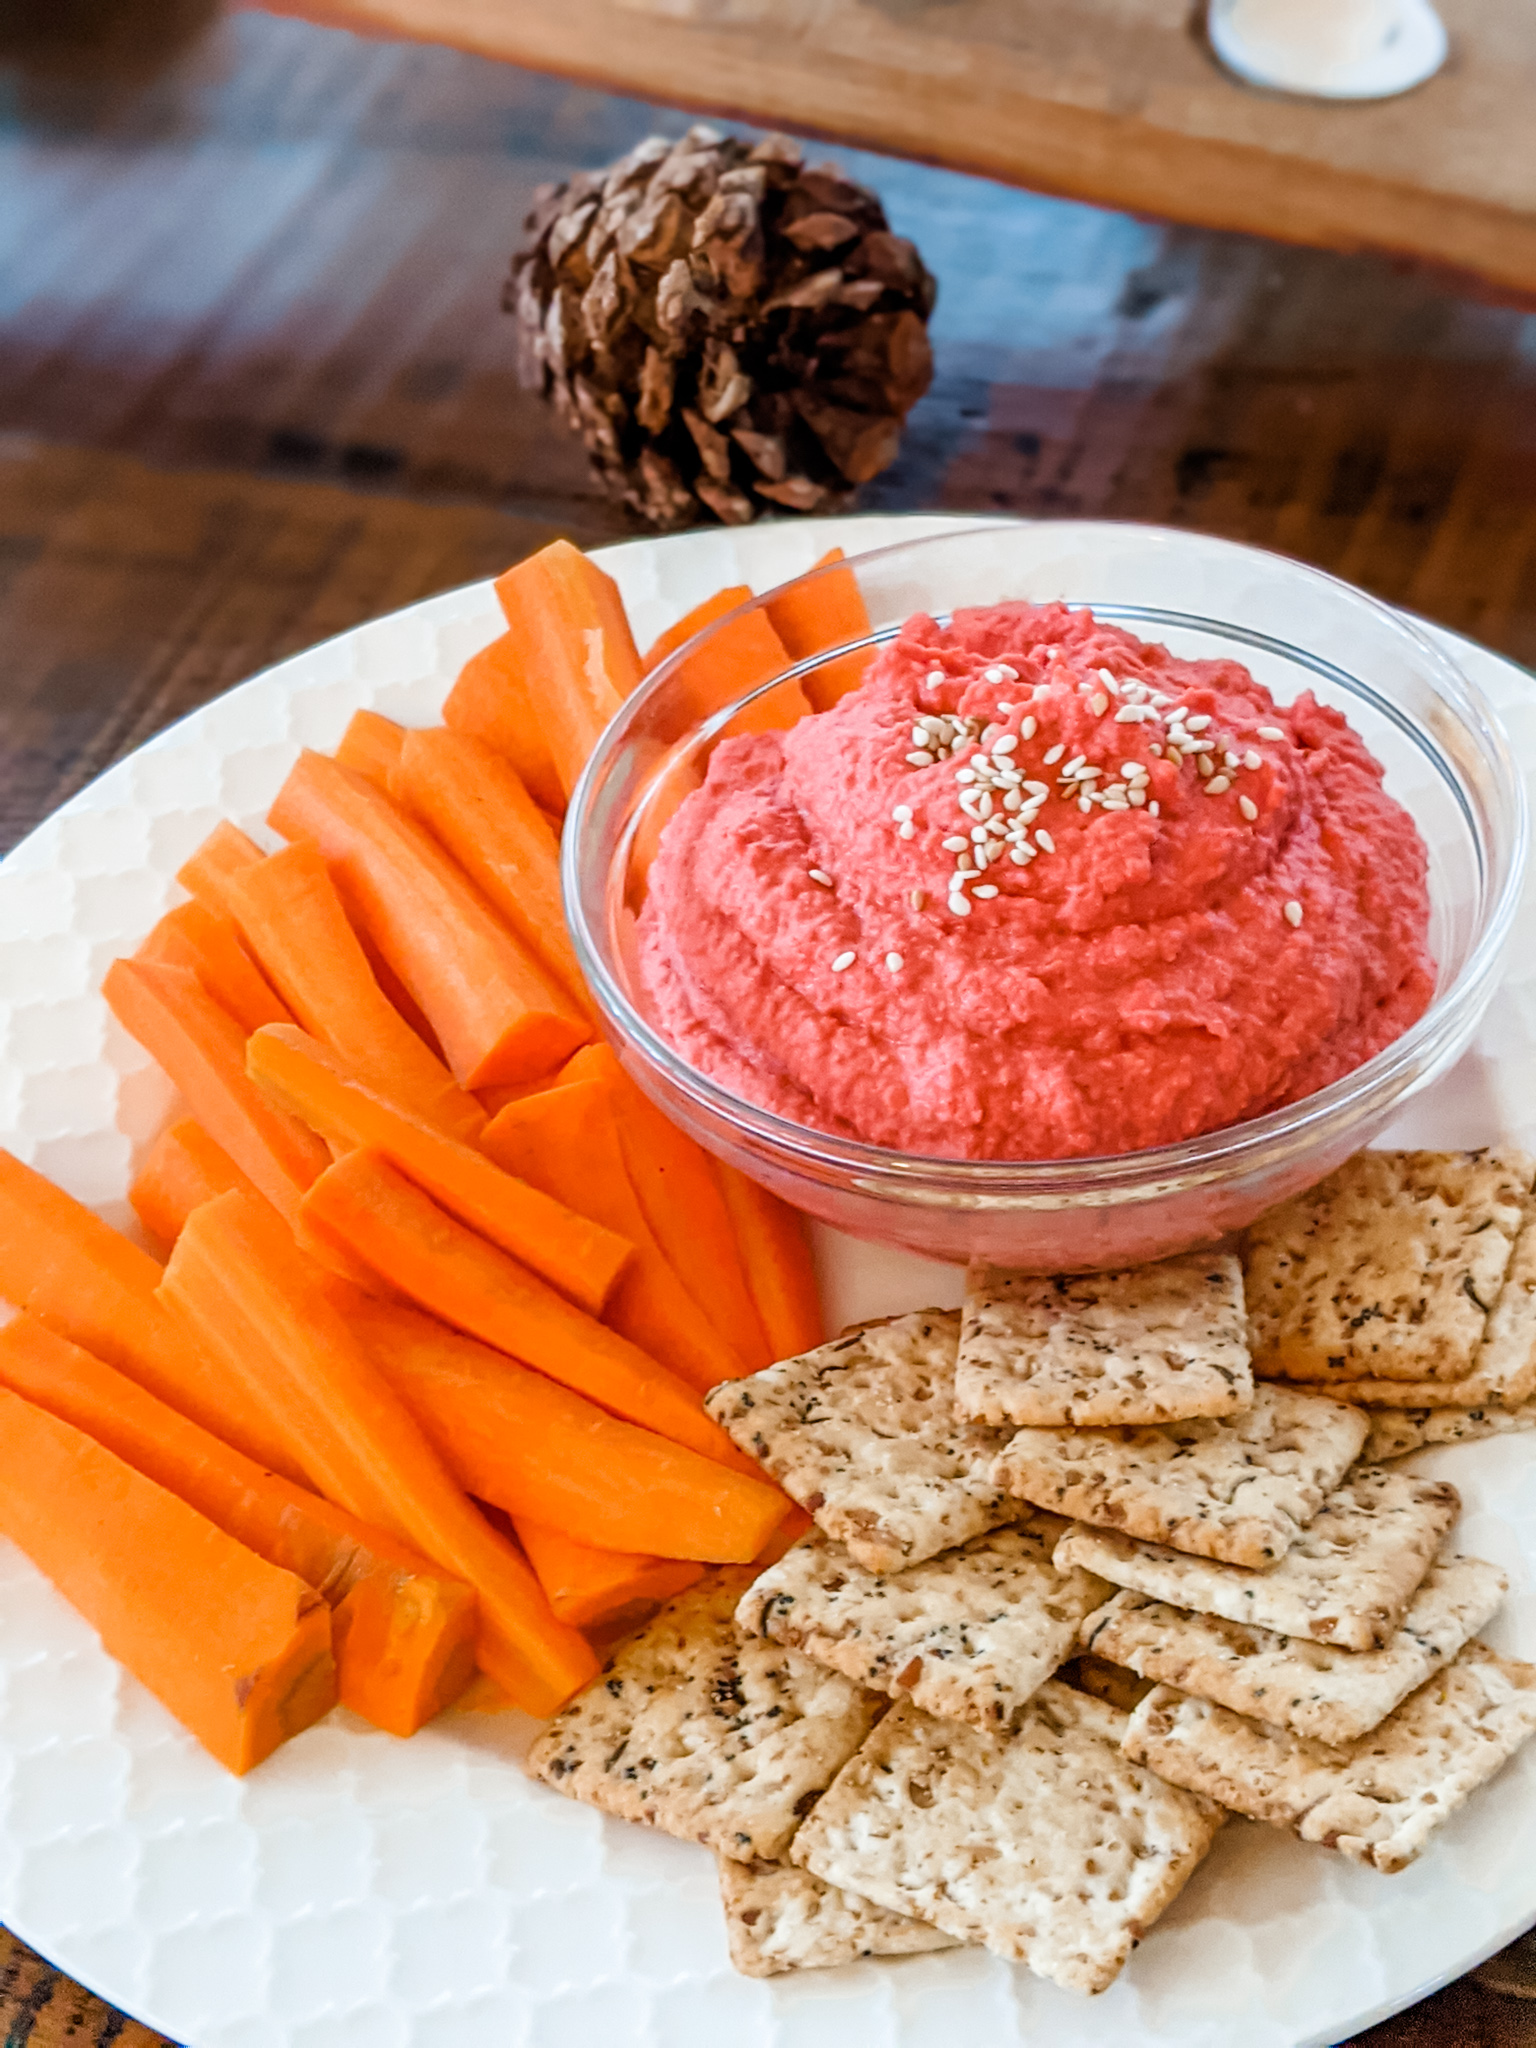 A plate of carrots, hummus, and crackers.